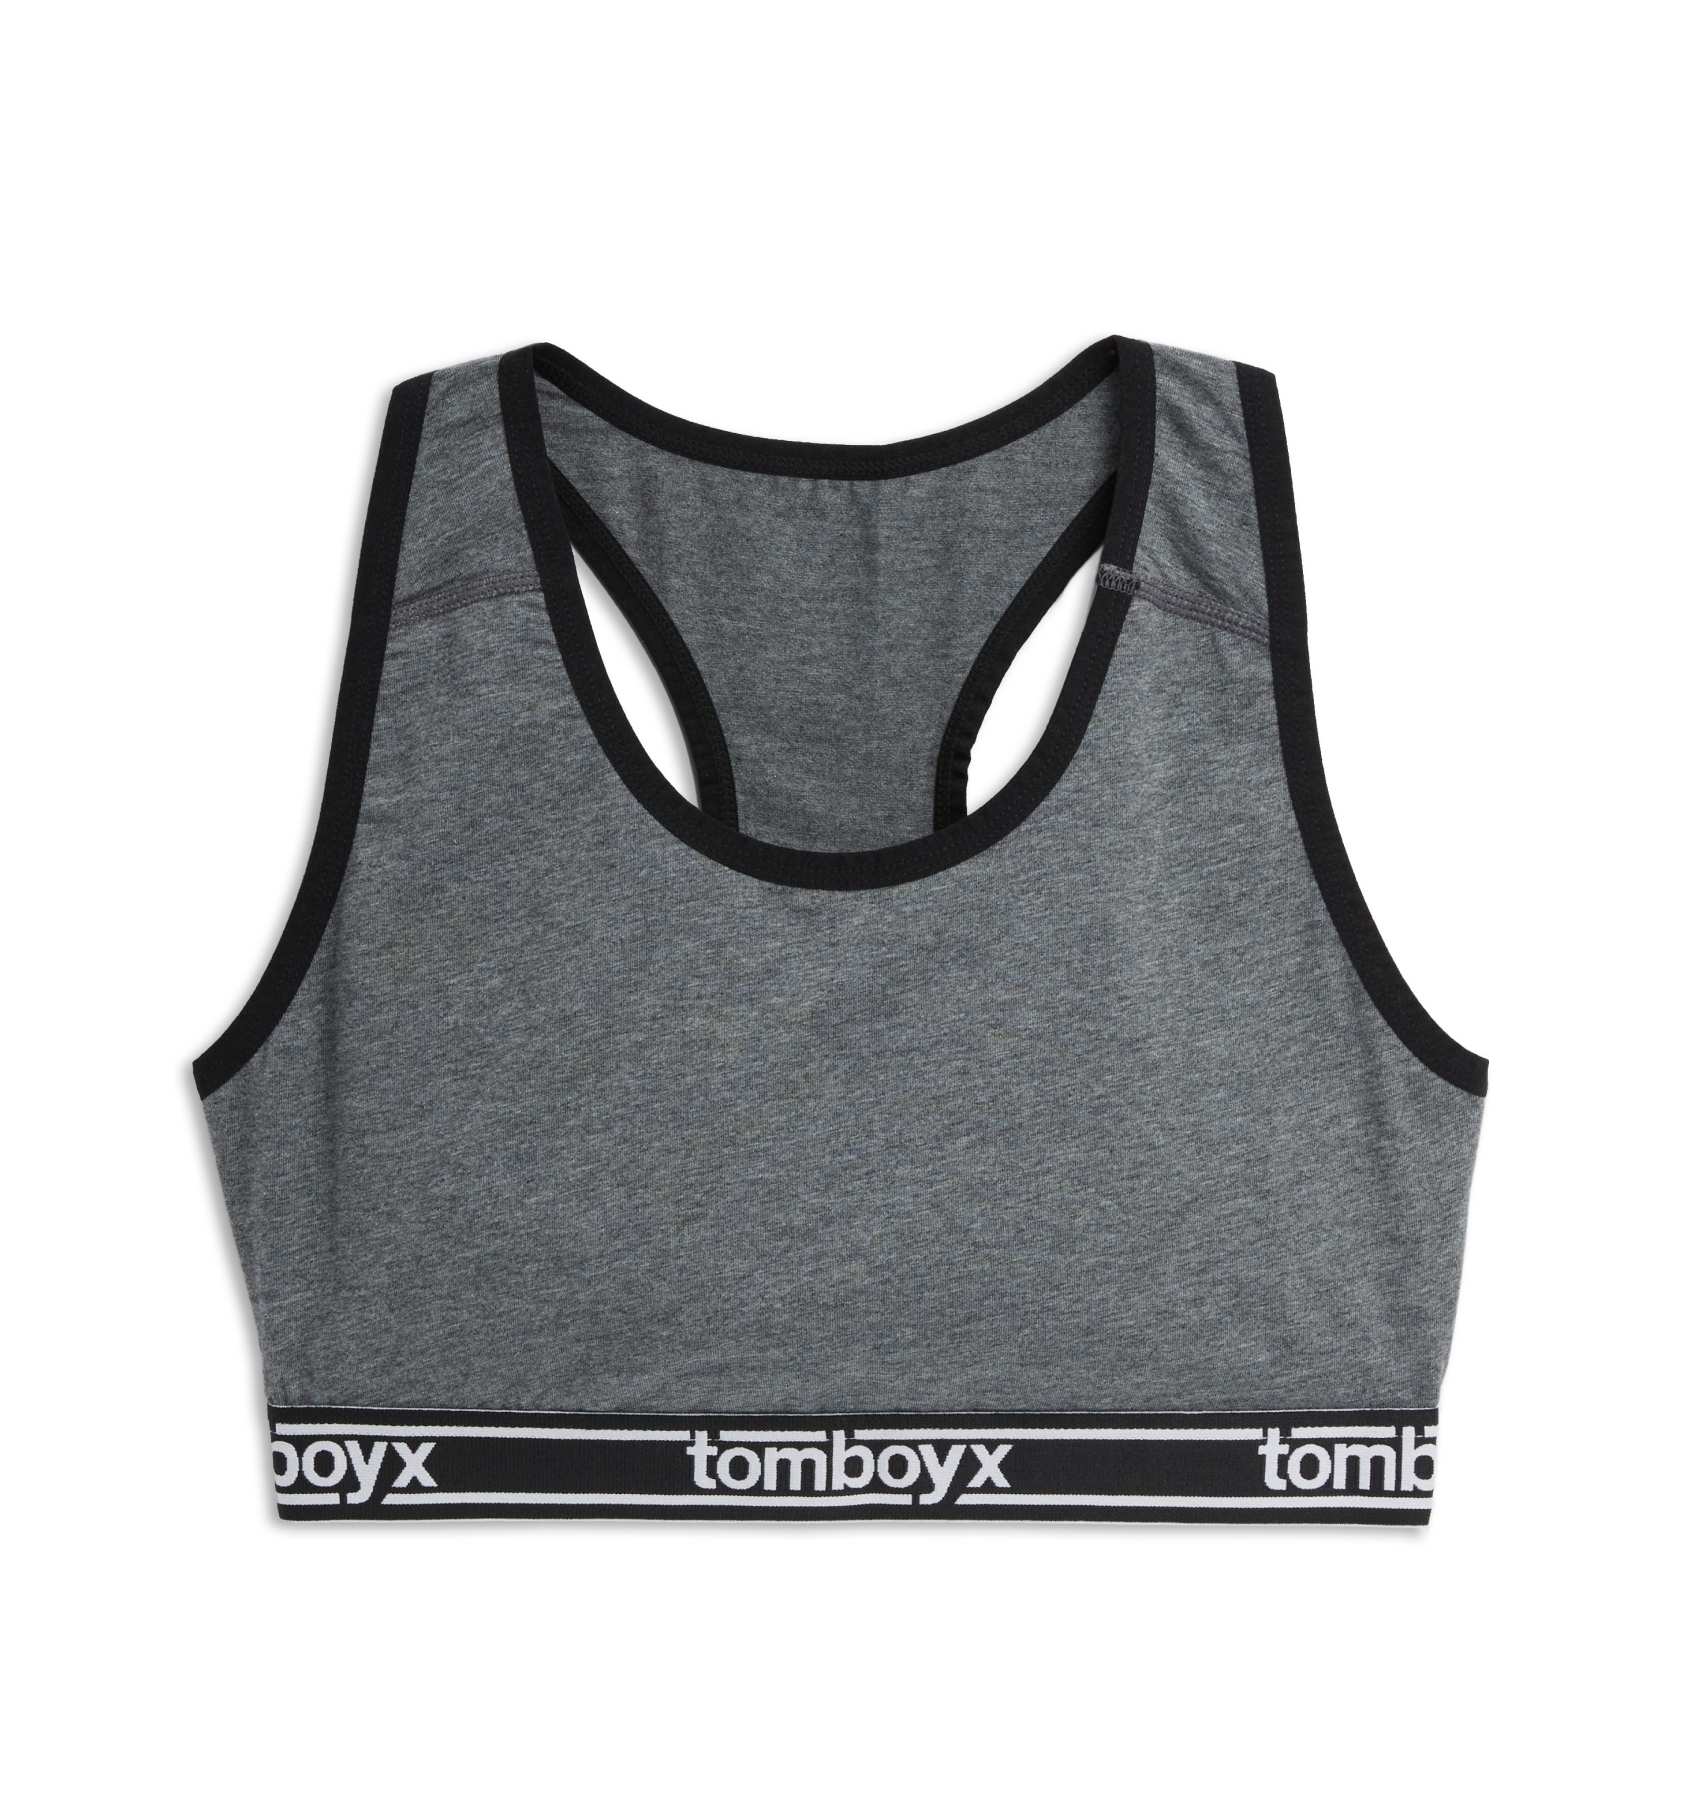 TomboyX Sports Bra, Low Impact Support, Wirefree Athletic Strappy Back Top,  Womens Plus-Size Inclusive Bras, (XS-6X) Smoke 5X Large